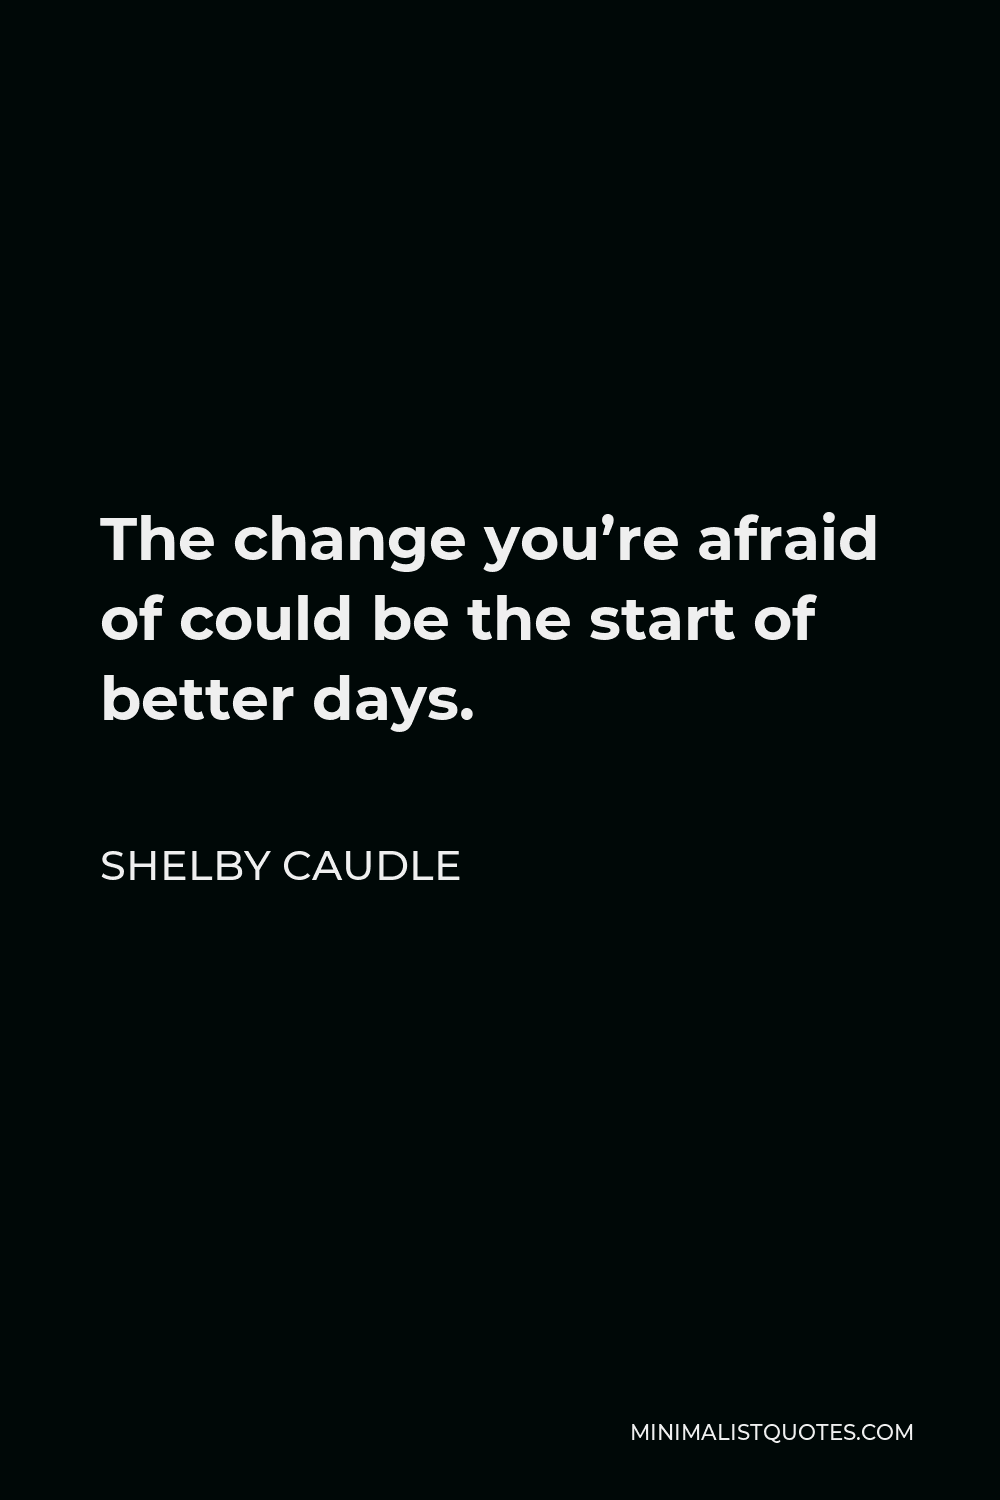 Shelby Caudle Quote - The change you’re afraid of could be the start of better days.